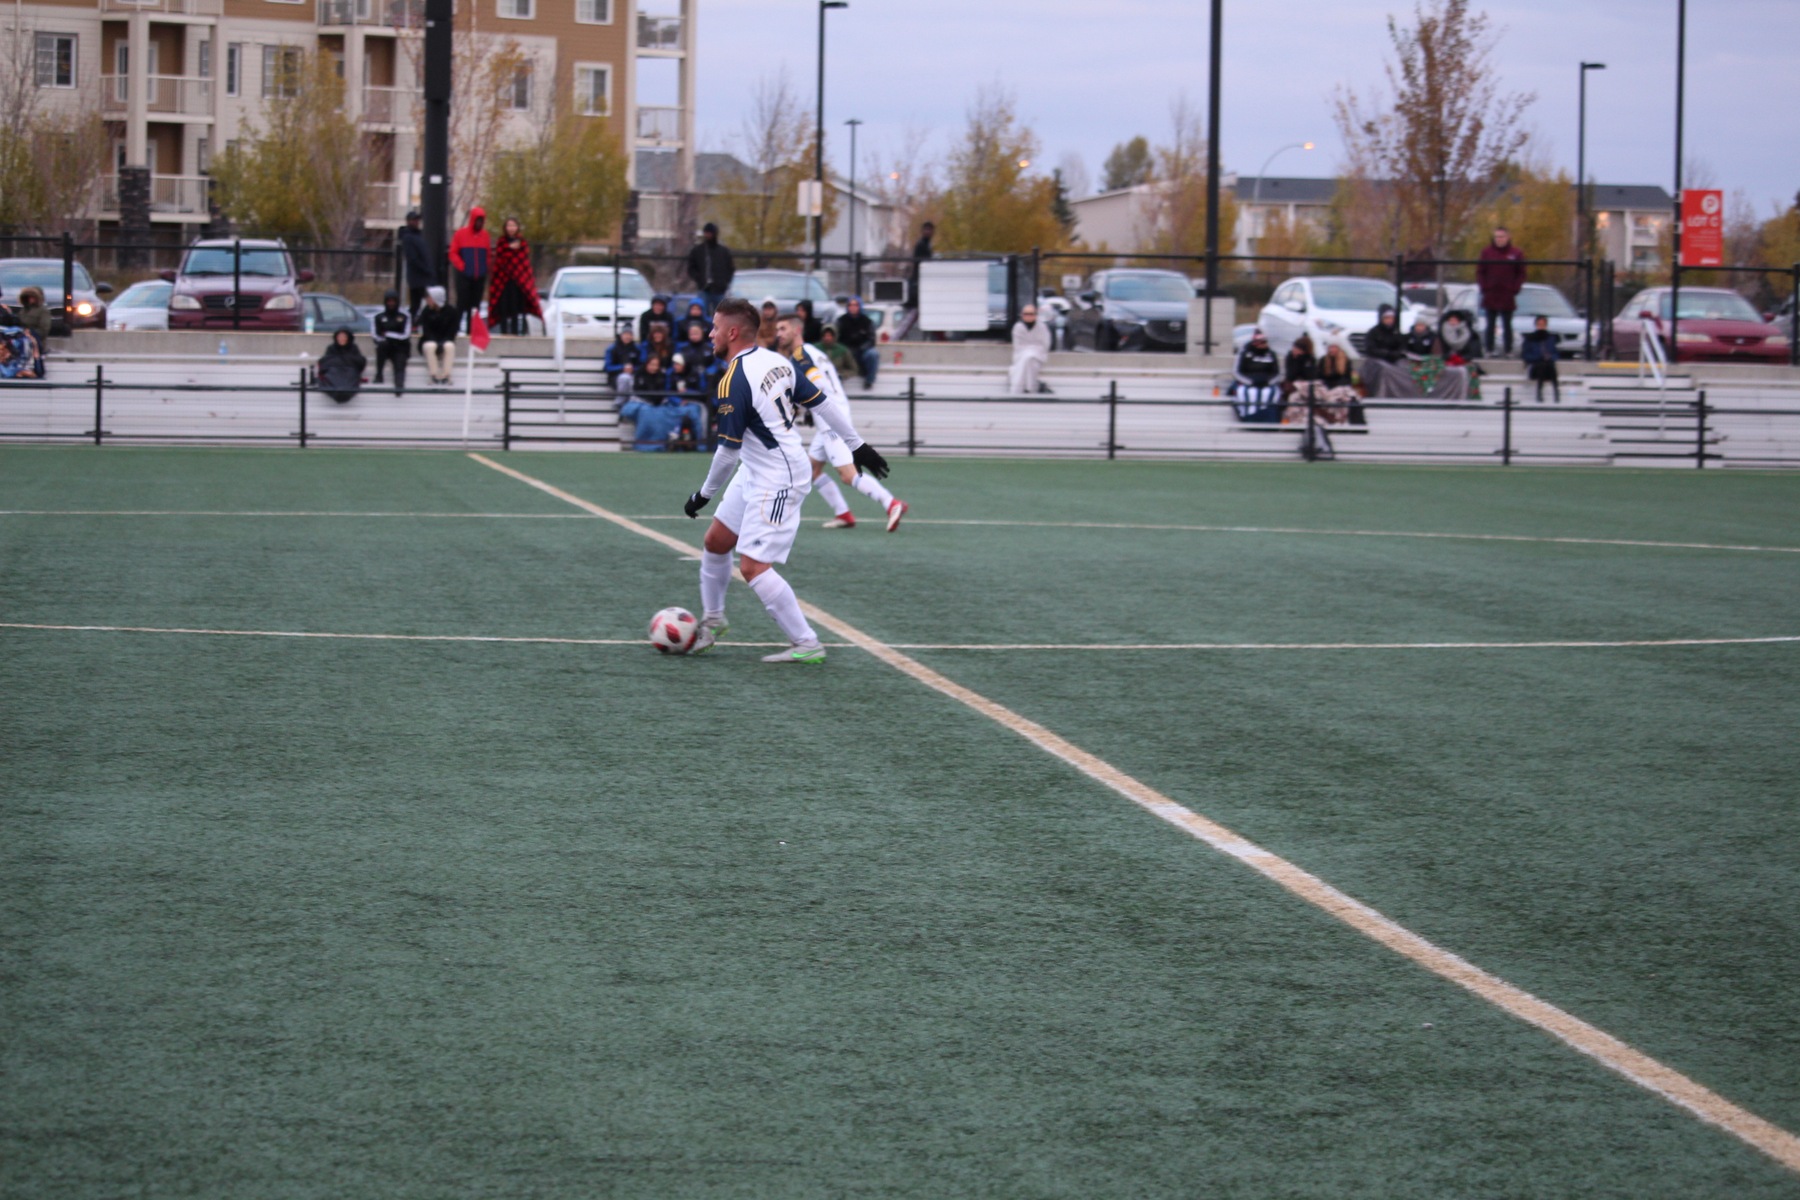 October 20th & 21st Soccer Games Moved to Clareview